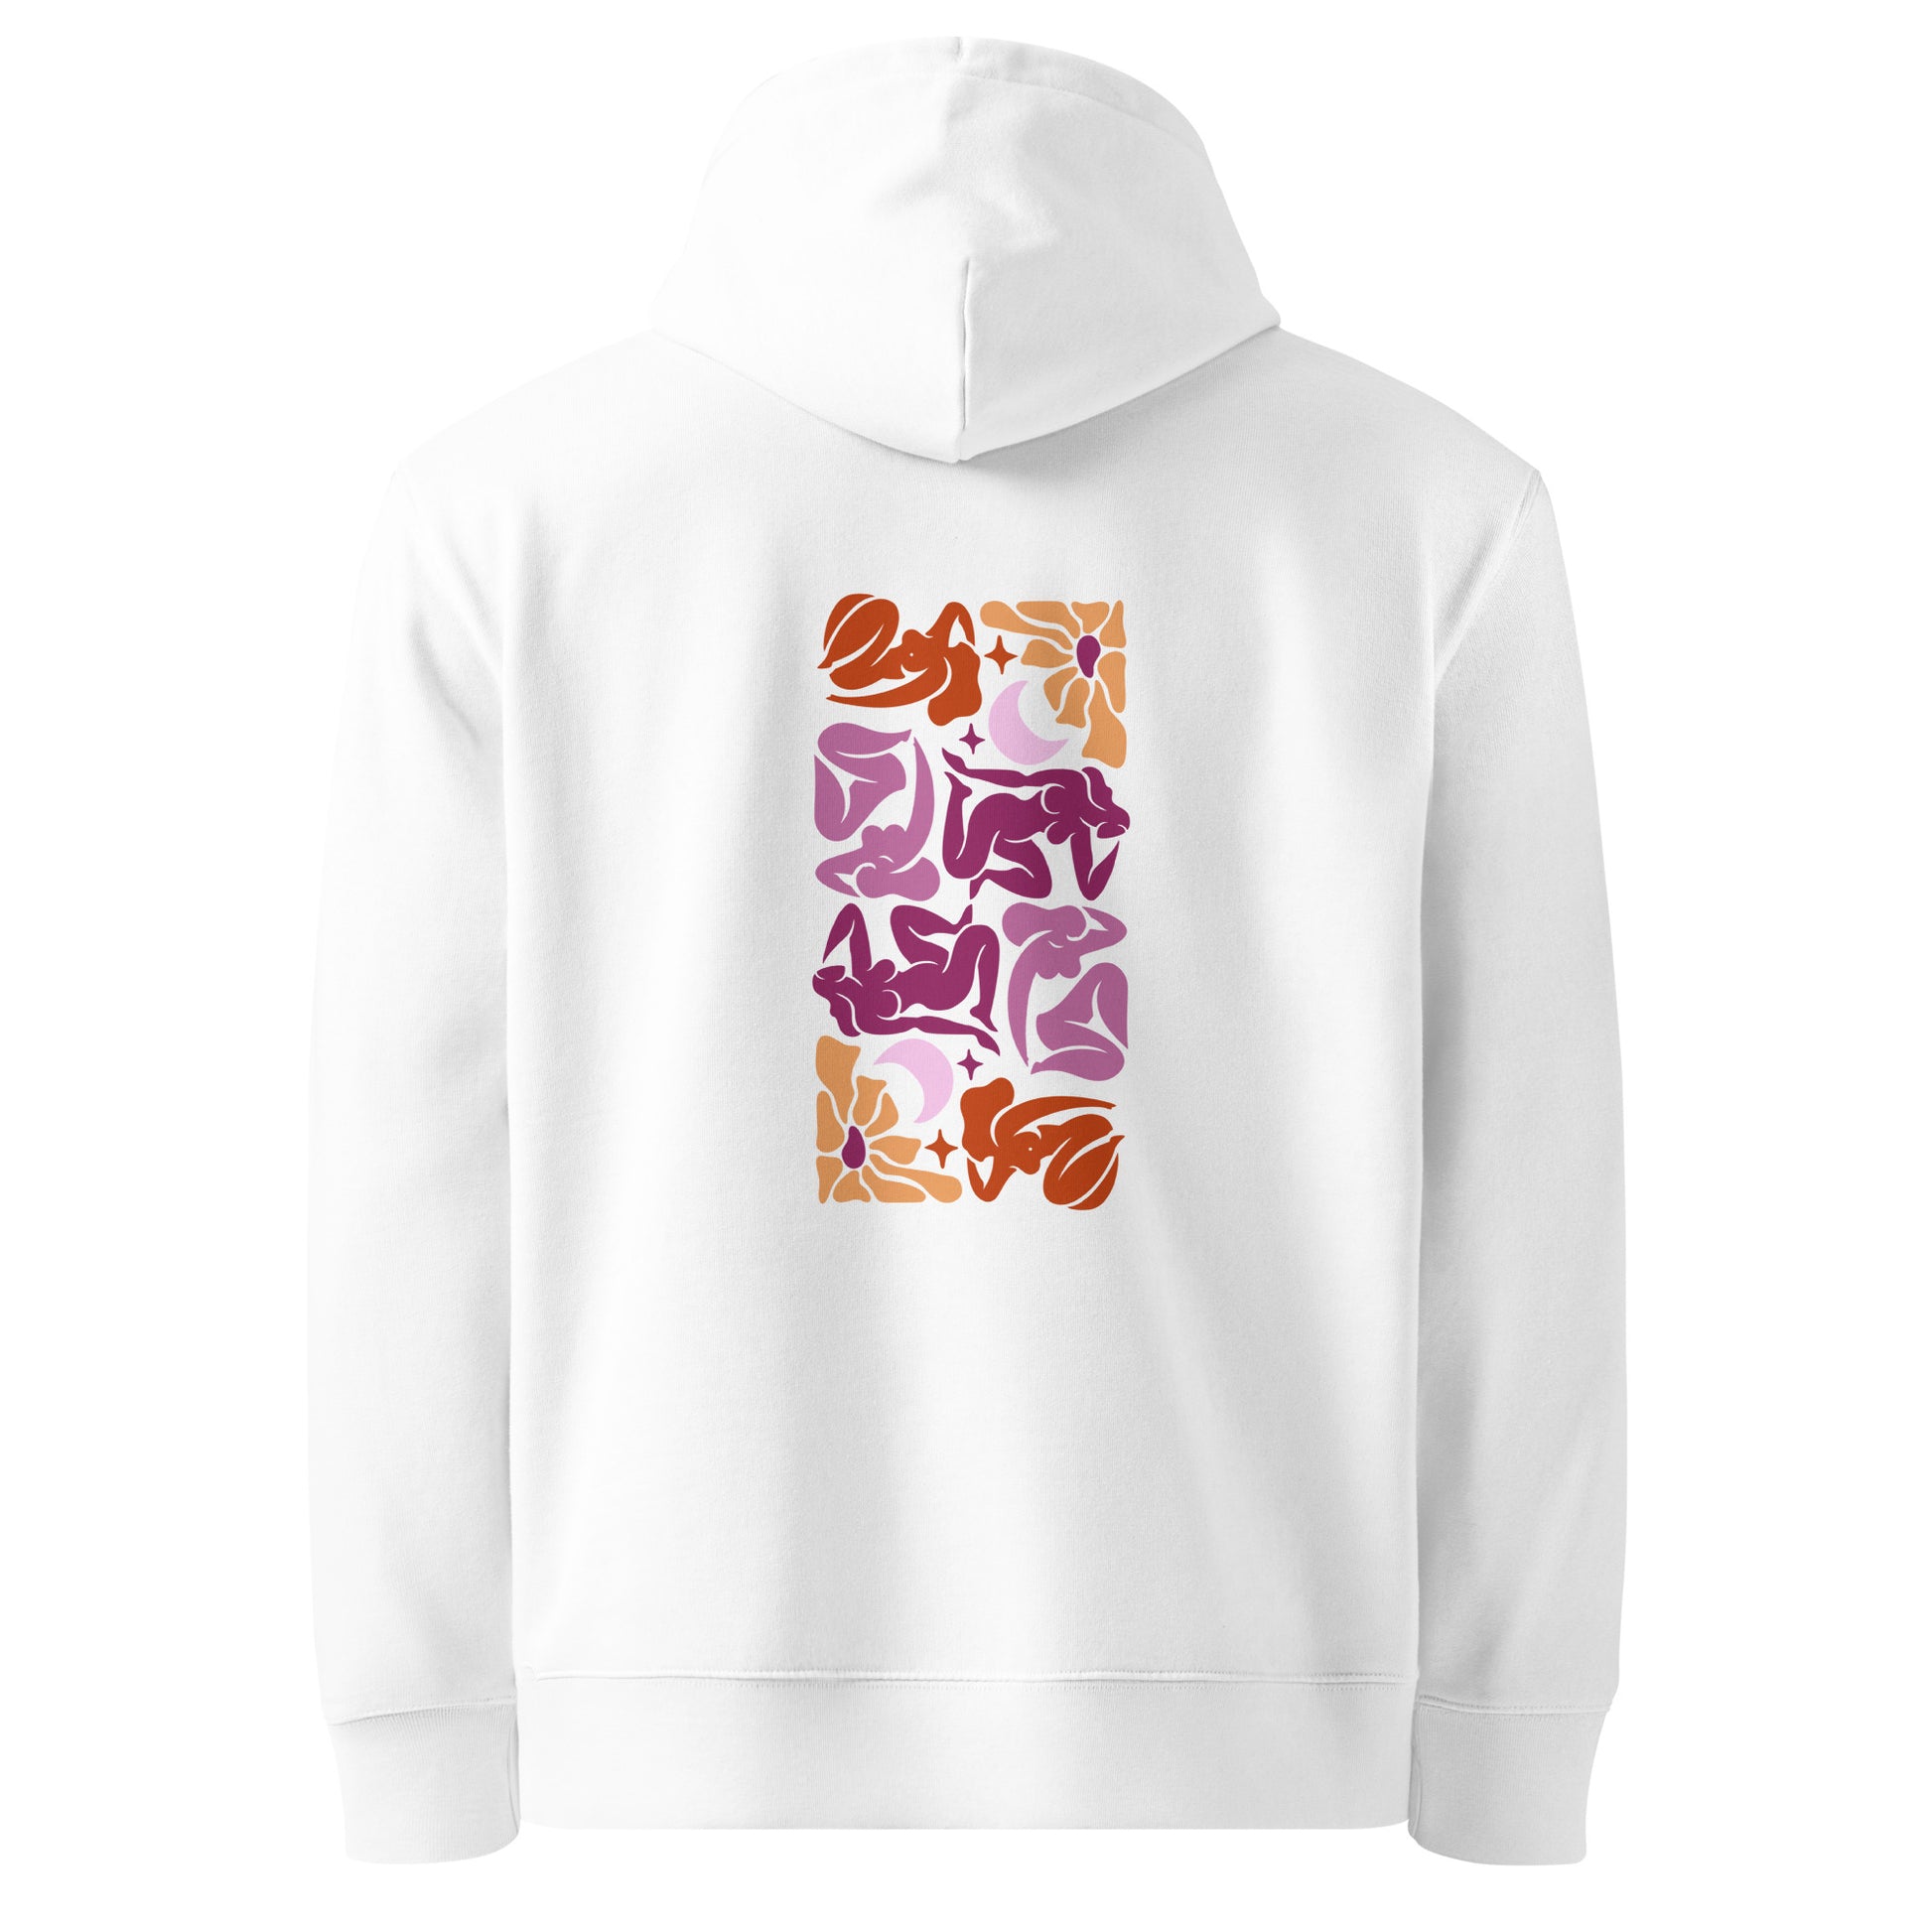 Unisex eco-friendly white hoodie featuring an embroidered Matisse mosaic-inspired design centered chest in lesbian colors, with the same design printed large on the back - adding a touch of lgbtq to your outfit. sizes: small, medium, large, extra large, double extra large.